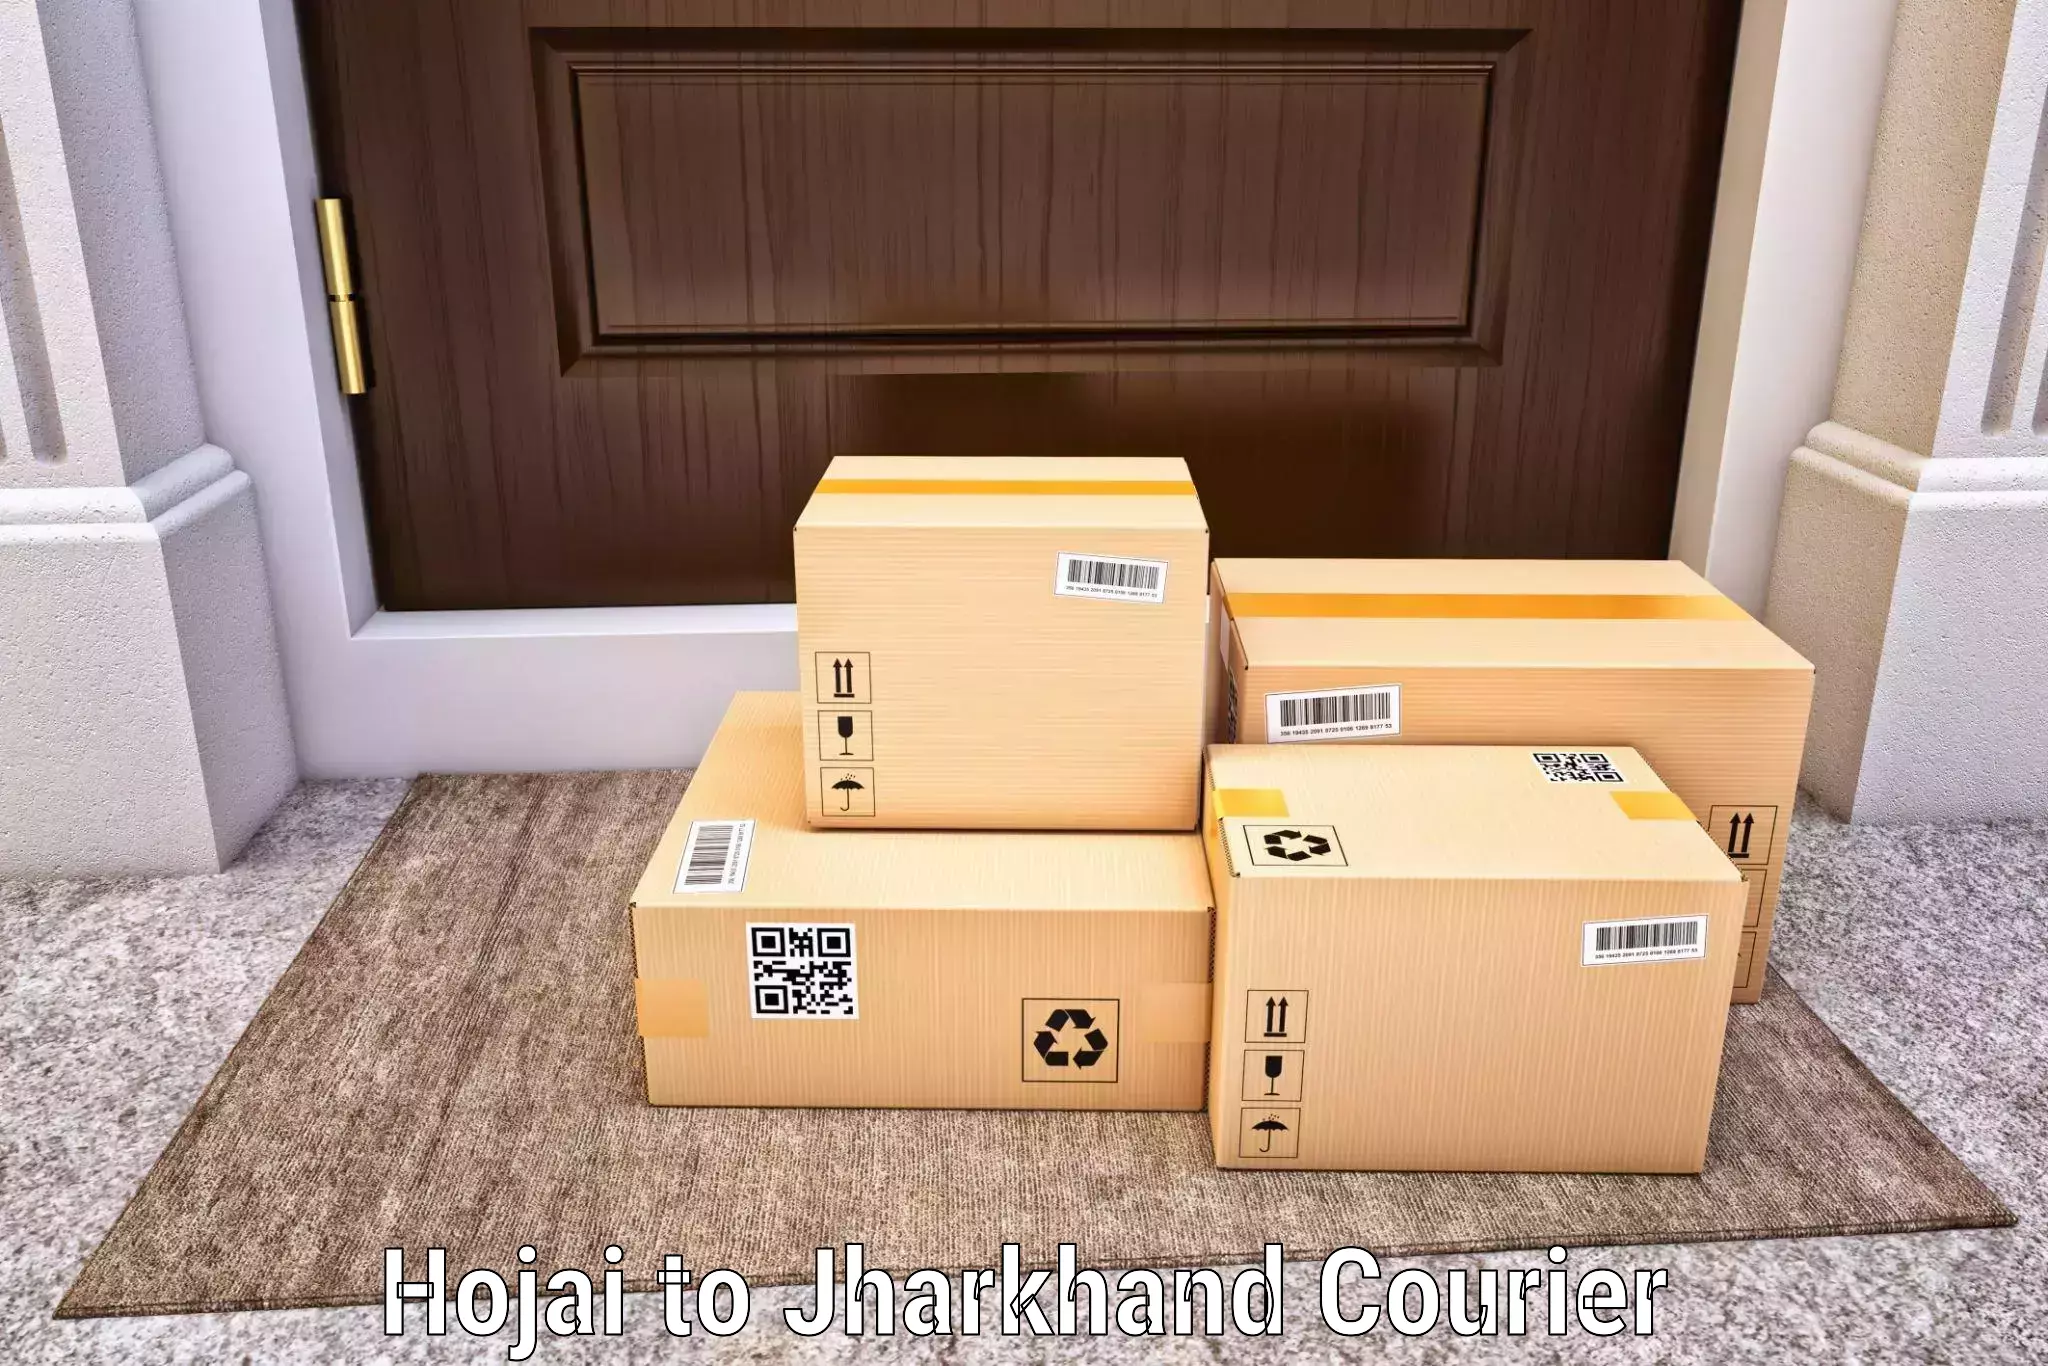 Comprehensive parcel tracking in Hojai to Deoghar